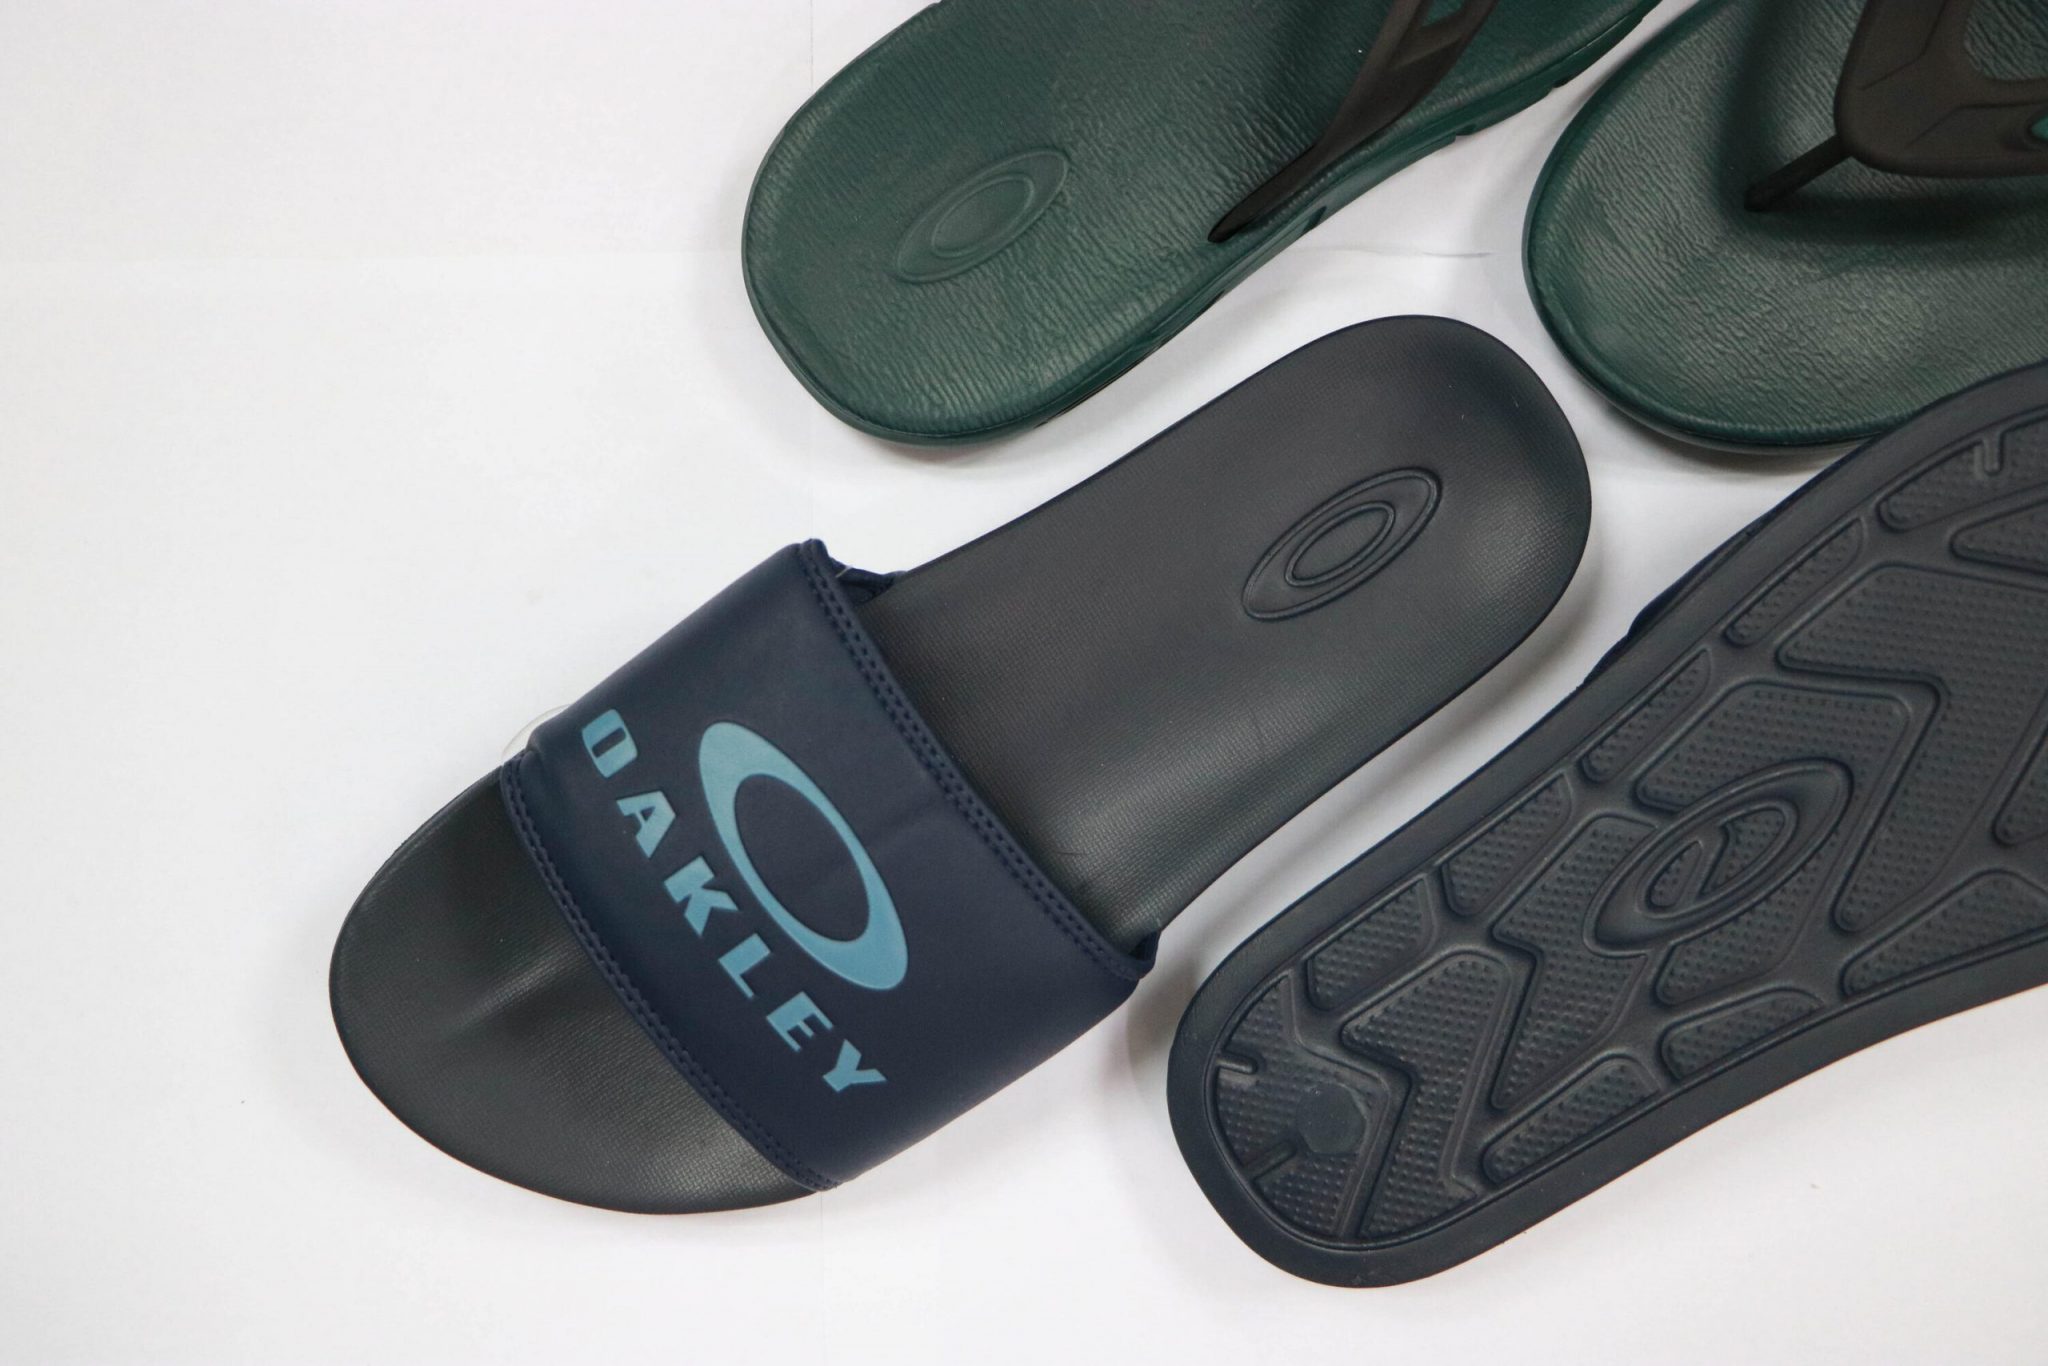 The Oakley Ellipse slides, P1,995, offers superb comfort for all-day use